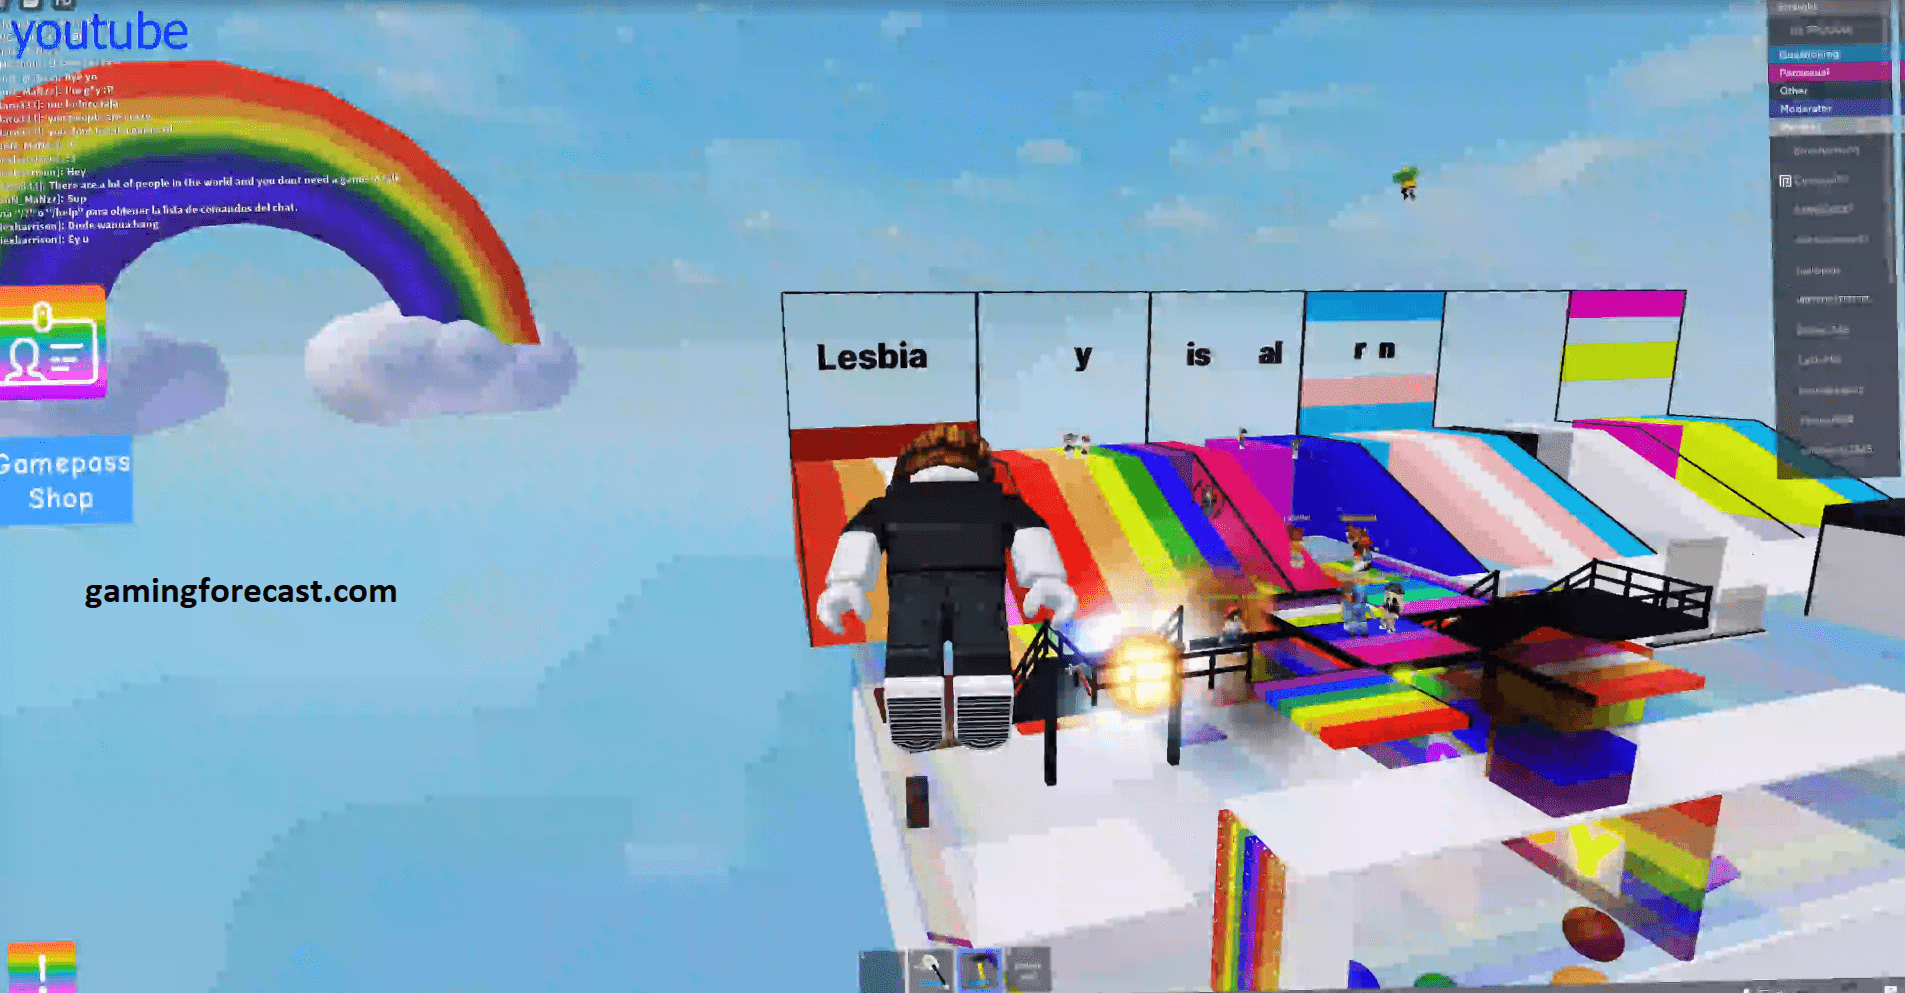 Roblox Hack Download Pc Destroy Lobby Fly Aimbot Scripts 2021 Gaming Forecast Download Free Online Game Hacks - download roblox pc hack